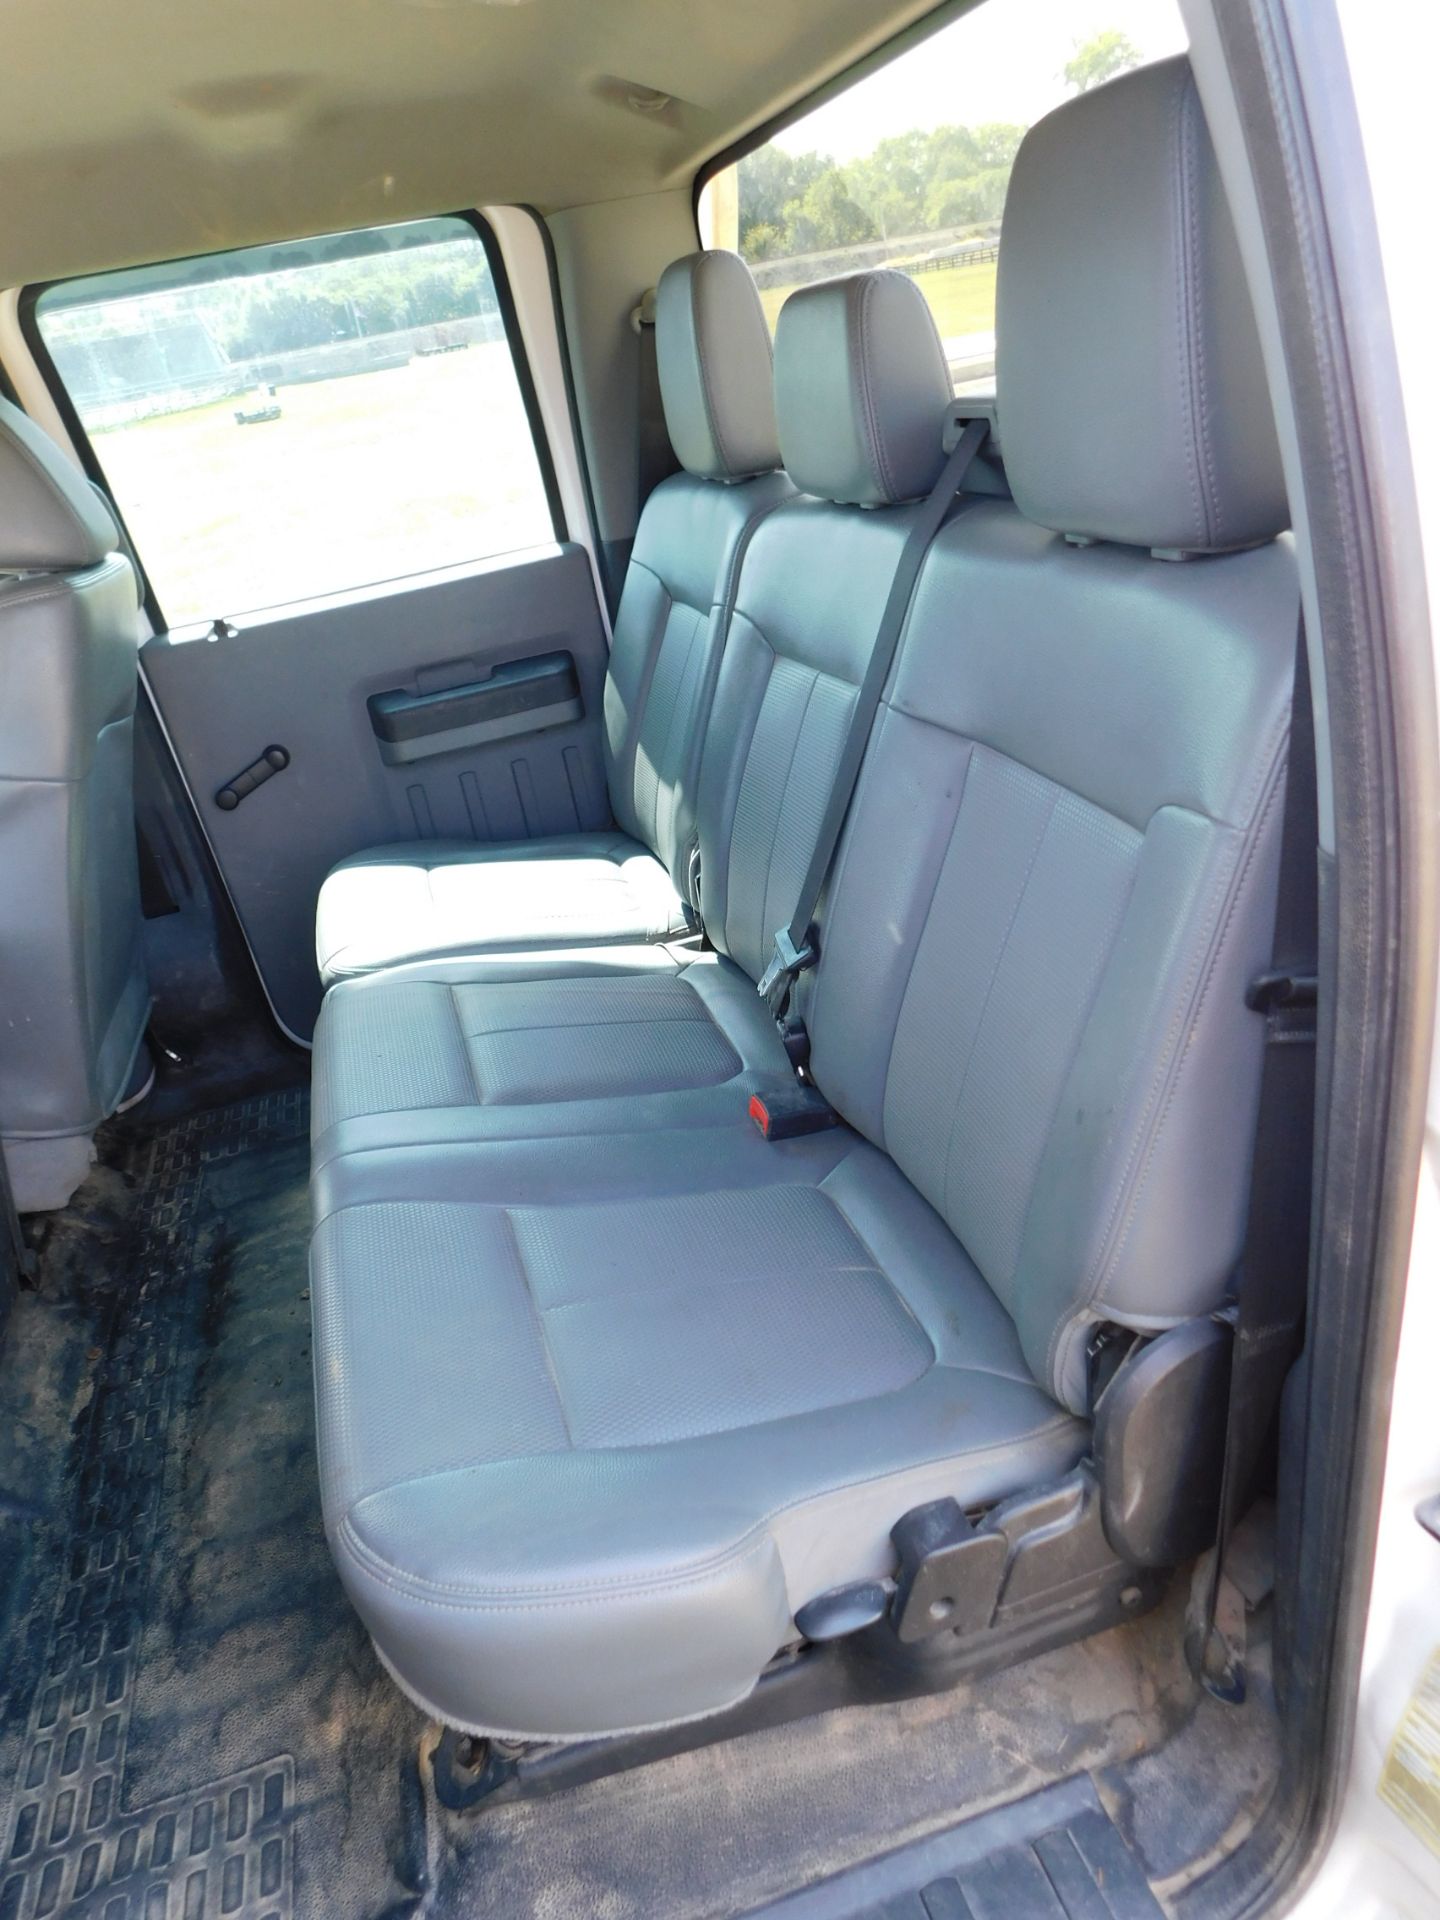 2013 Ford F250 Super Duty Service Truck, Crew Cab, Royal 8' Utility Bed, 4 WD, 153,573 Miles, AC, - Image 35 of 47